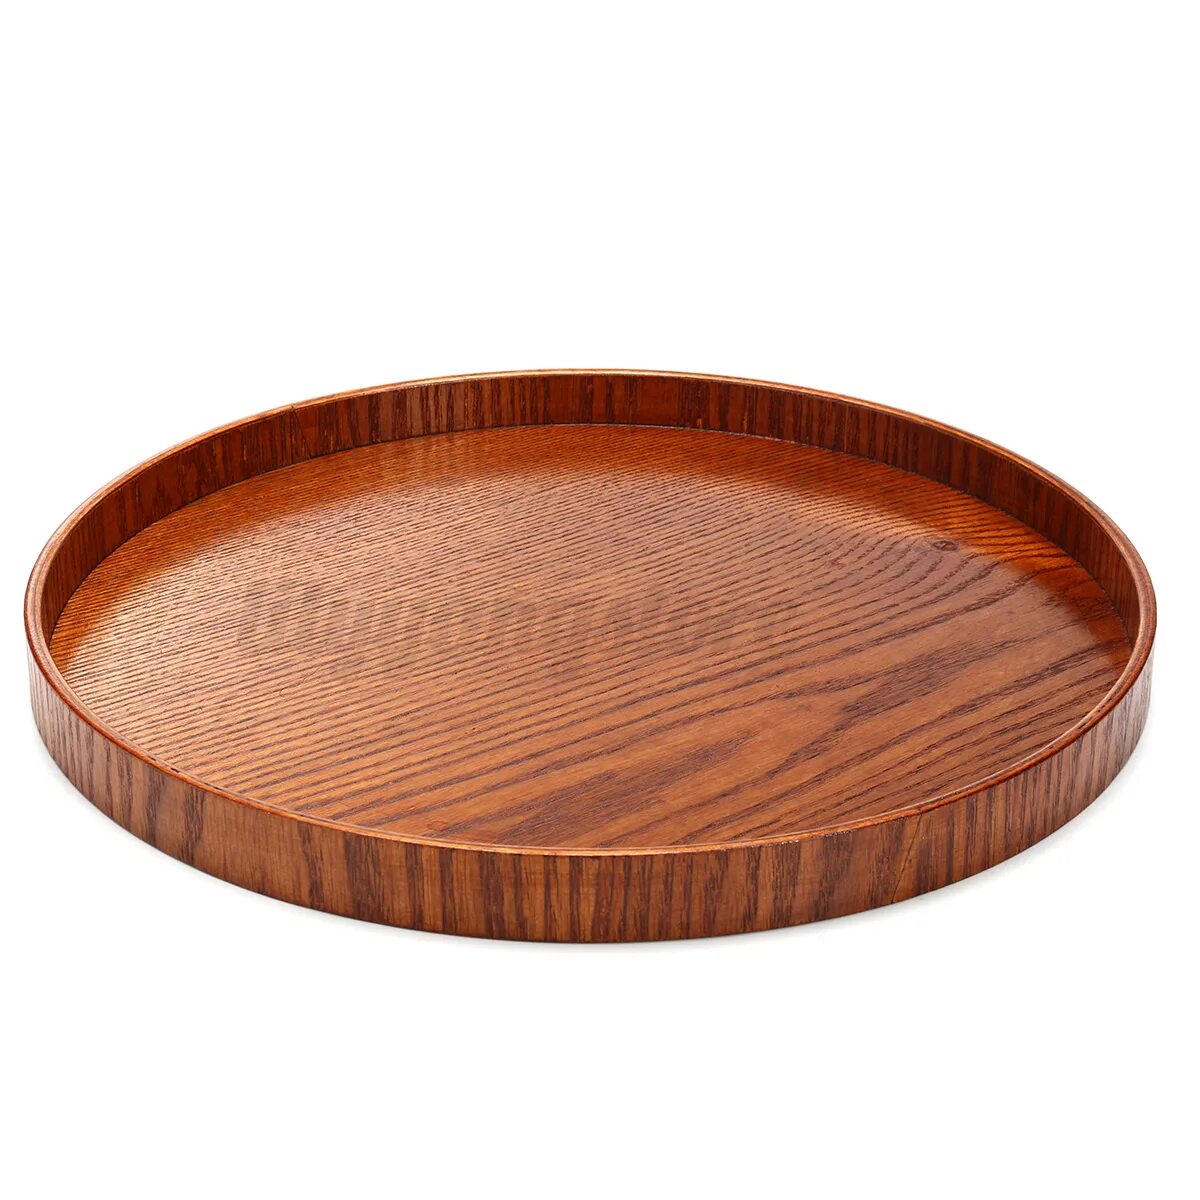 Round plate. Поднос сверху. Wooden Plate. Round Wood Tray. Упаковка Wooden Tray 1000*3000.